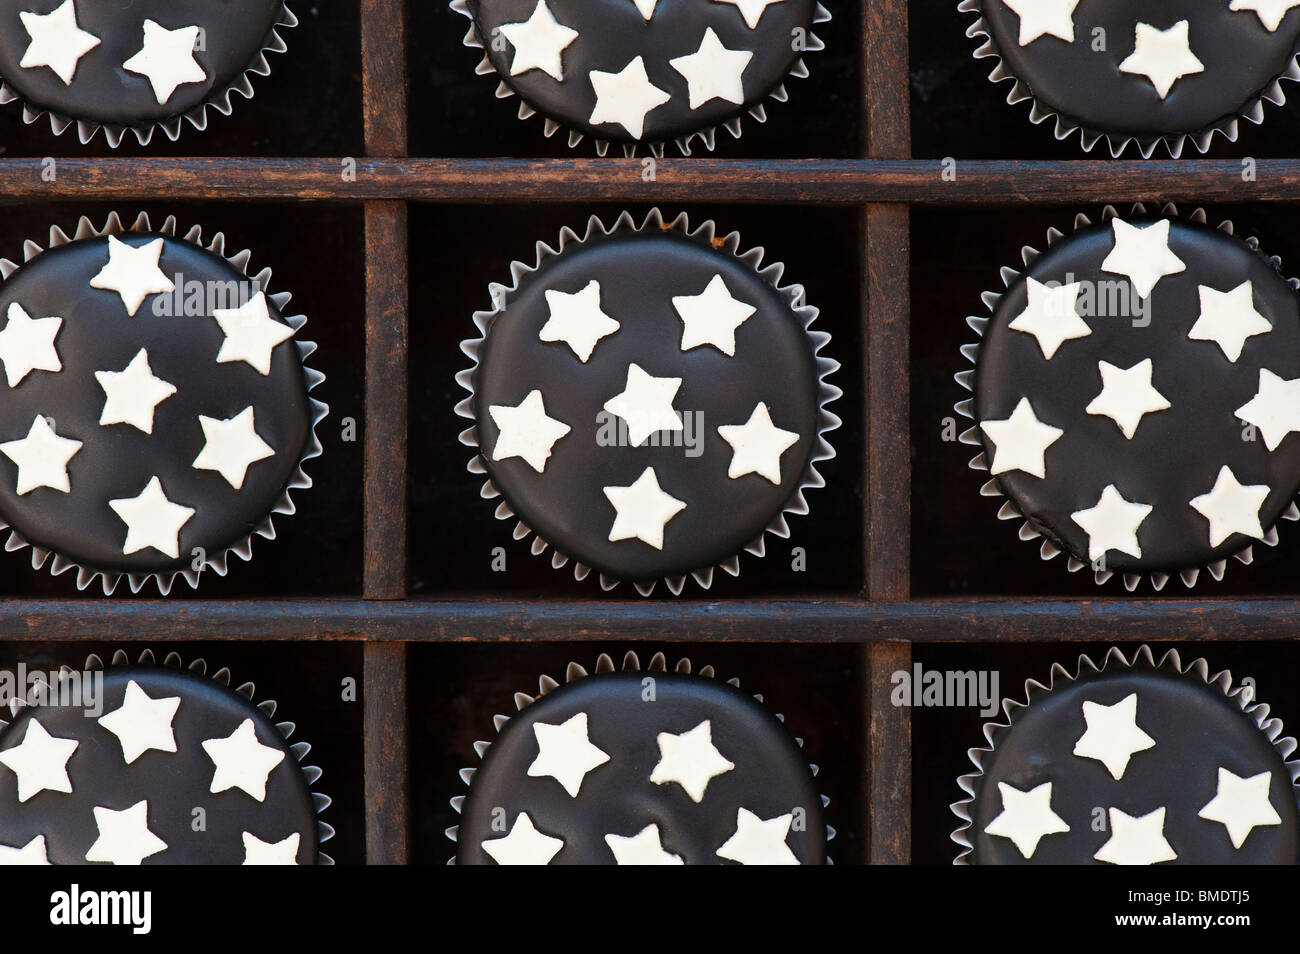 Mini cupcakes decorated with black icing and white chocolate stars in a wooden tray Stock Photo